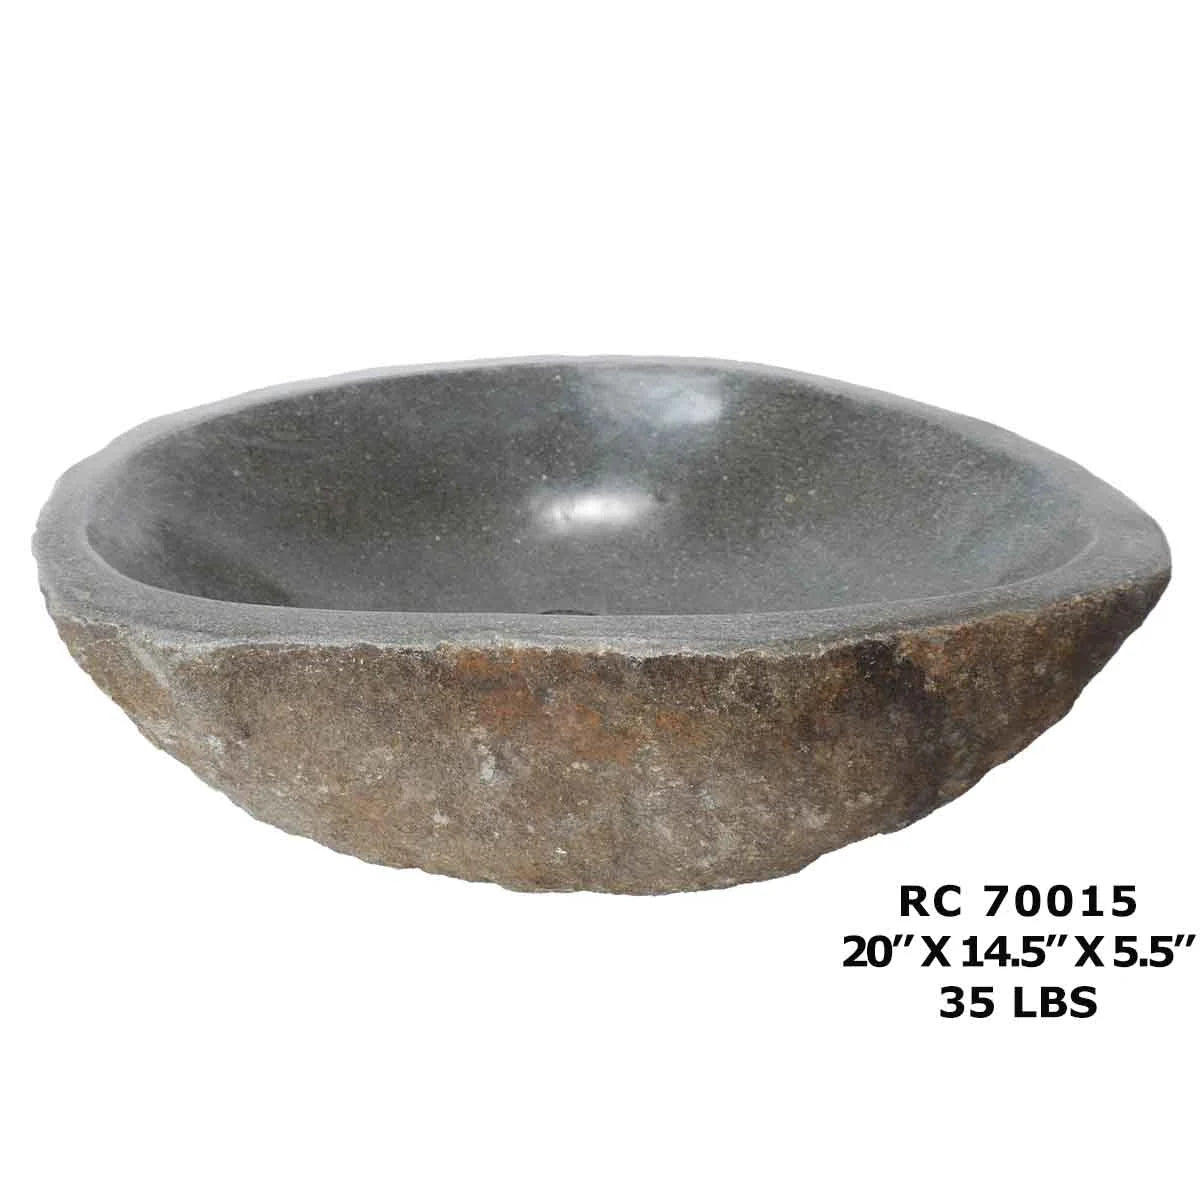 RC70015-Natural River Stone Sink Bowl for Bathroom